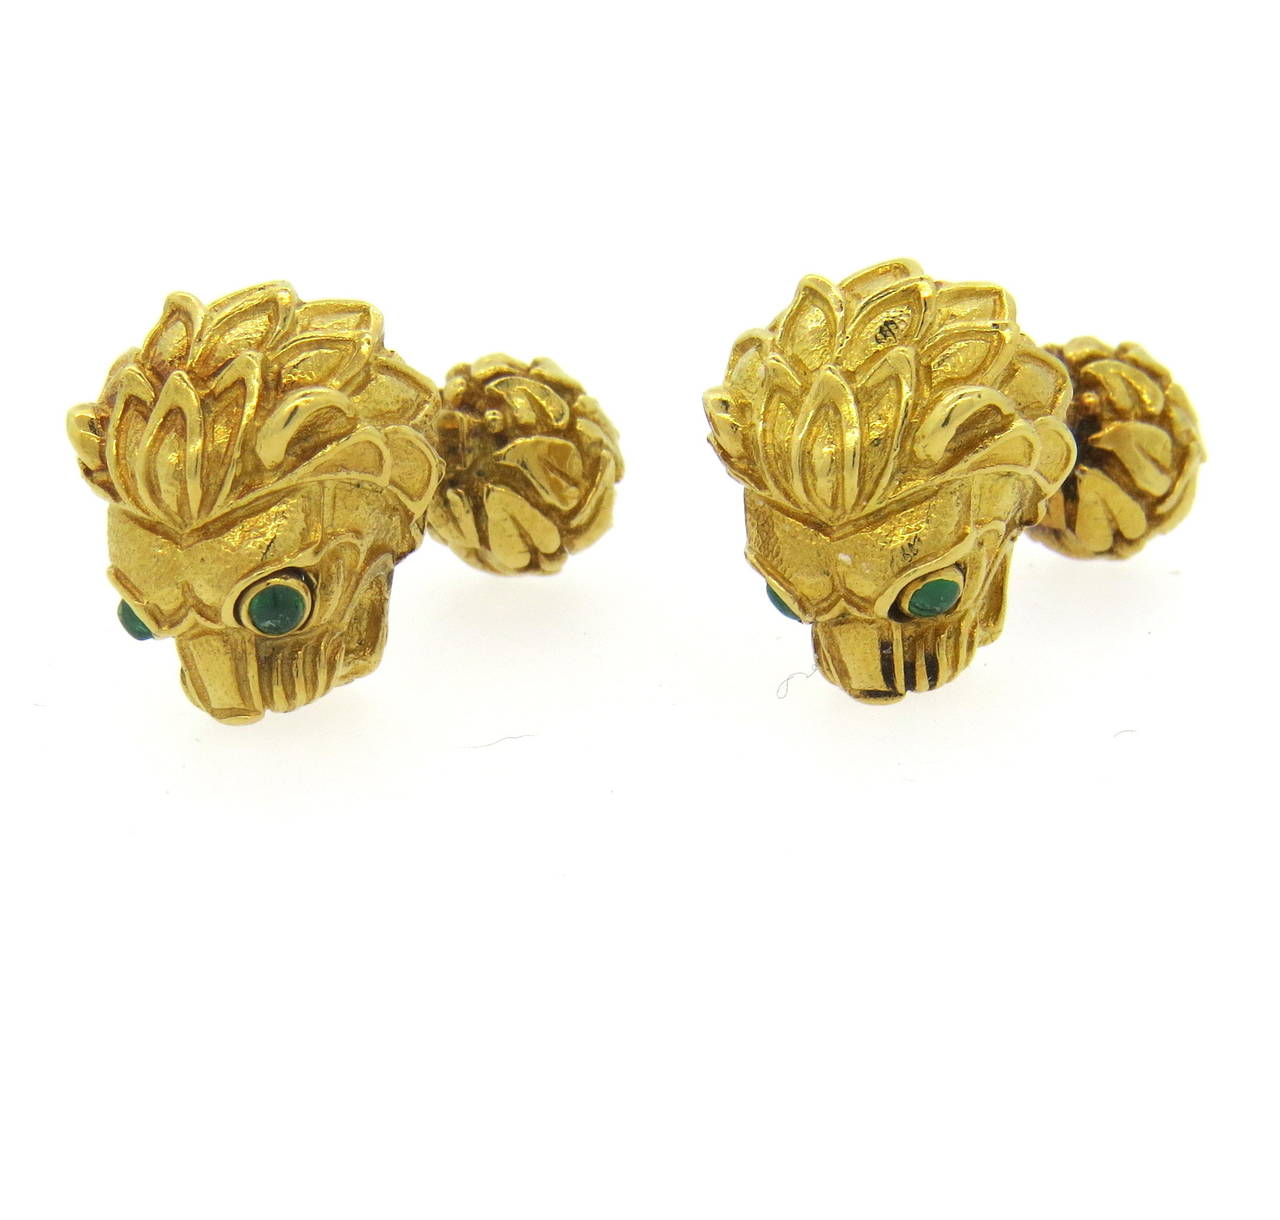 A pair of 18k yellow gold cufflinks set with emerald cabochons 2.1mm in diameter.  Crafted by David Webb, the cufflinks measure 18mm x 15mm and weigh 32 grams.  Marked: Webb, 18k.